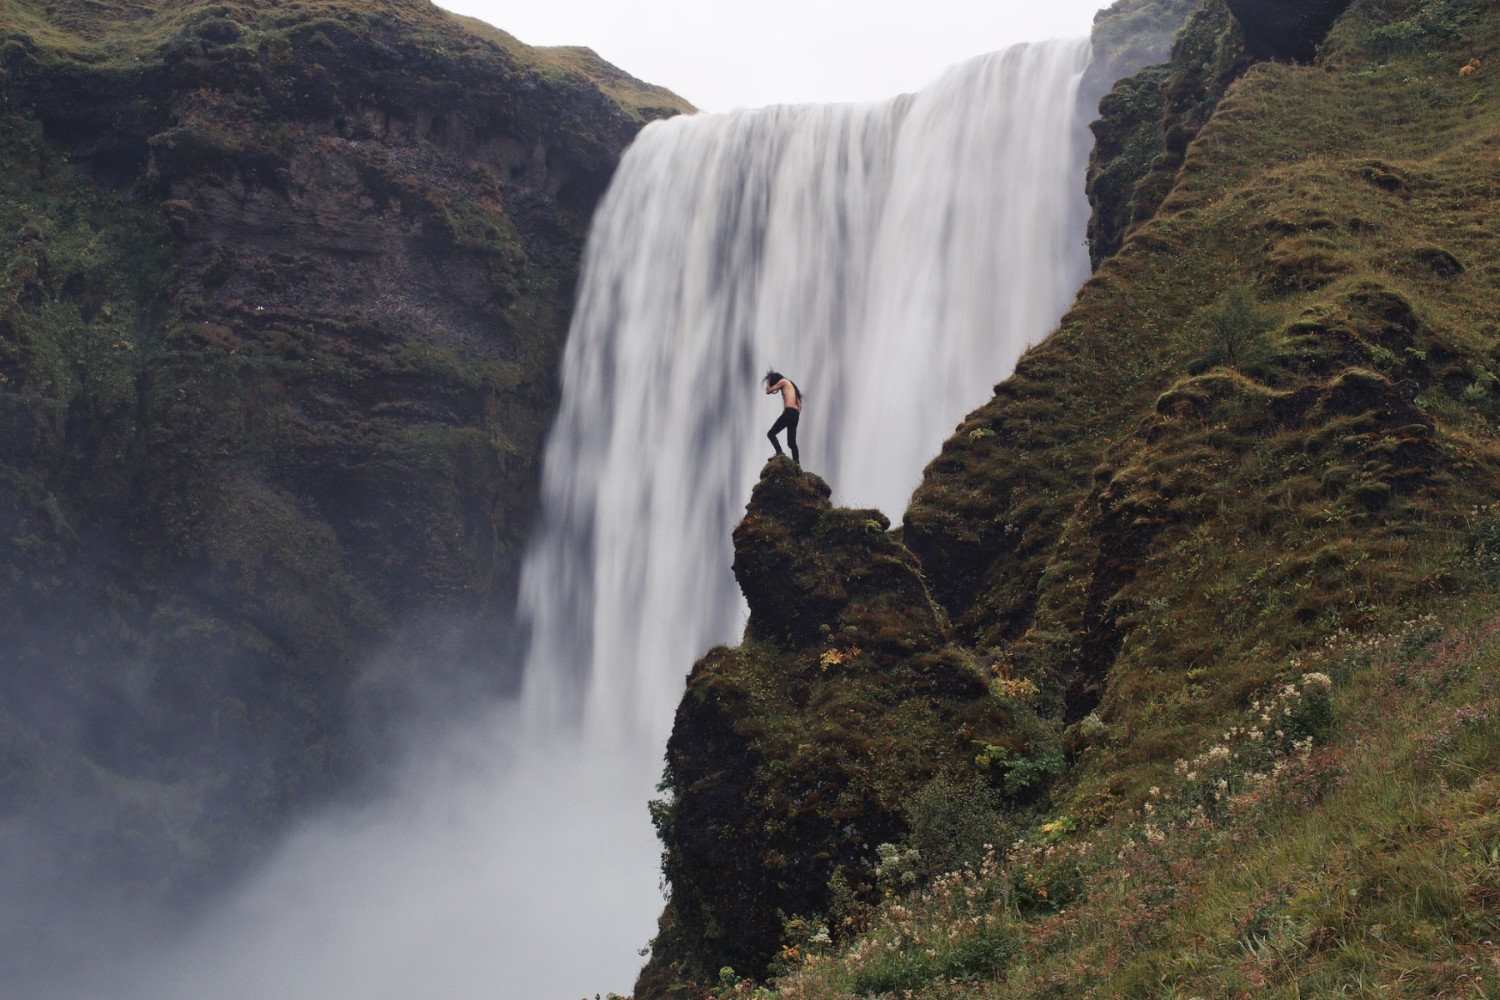 Brilliant Self-Portraits Add a Human Touch to Iceland's Epic Landscapes